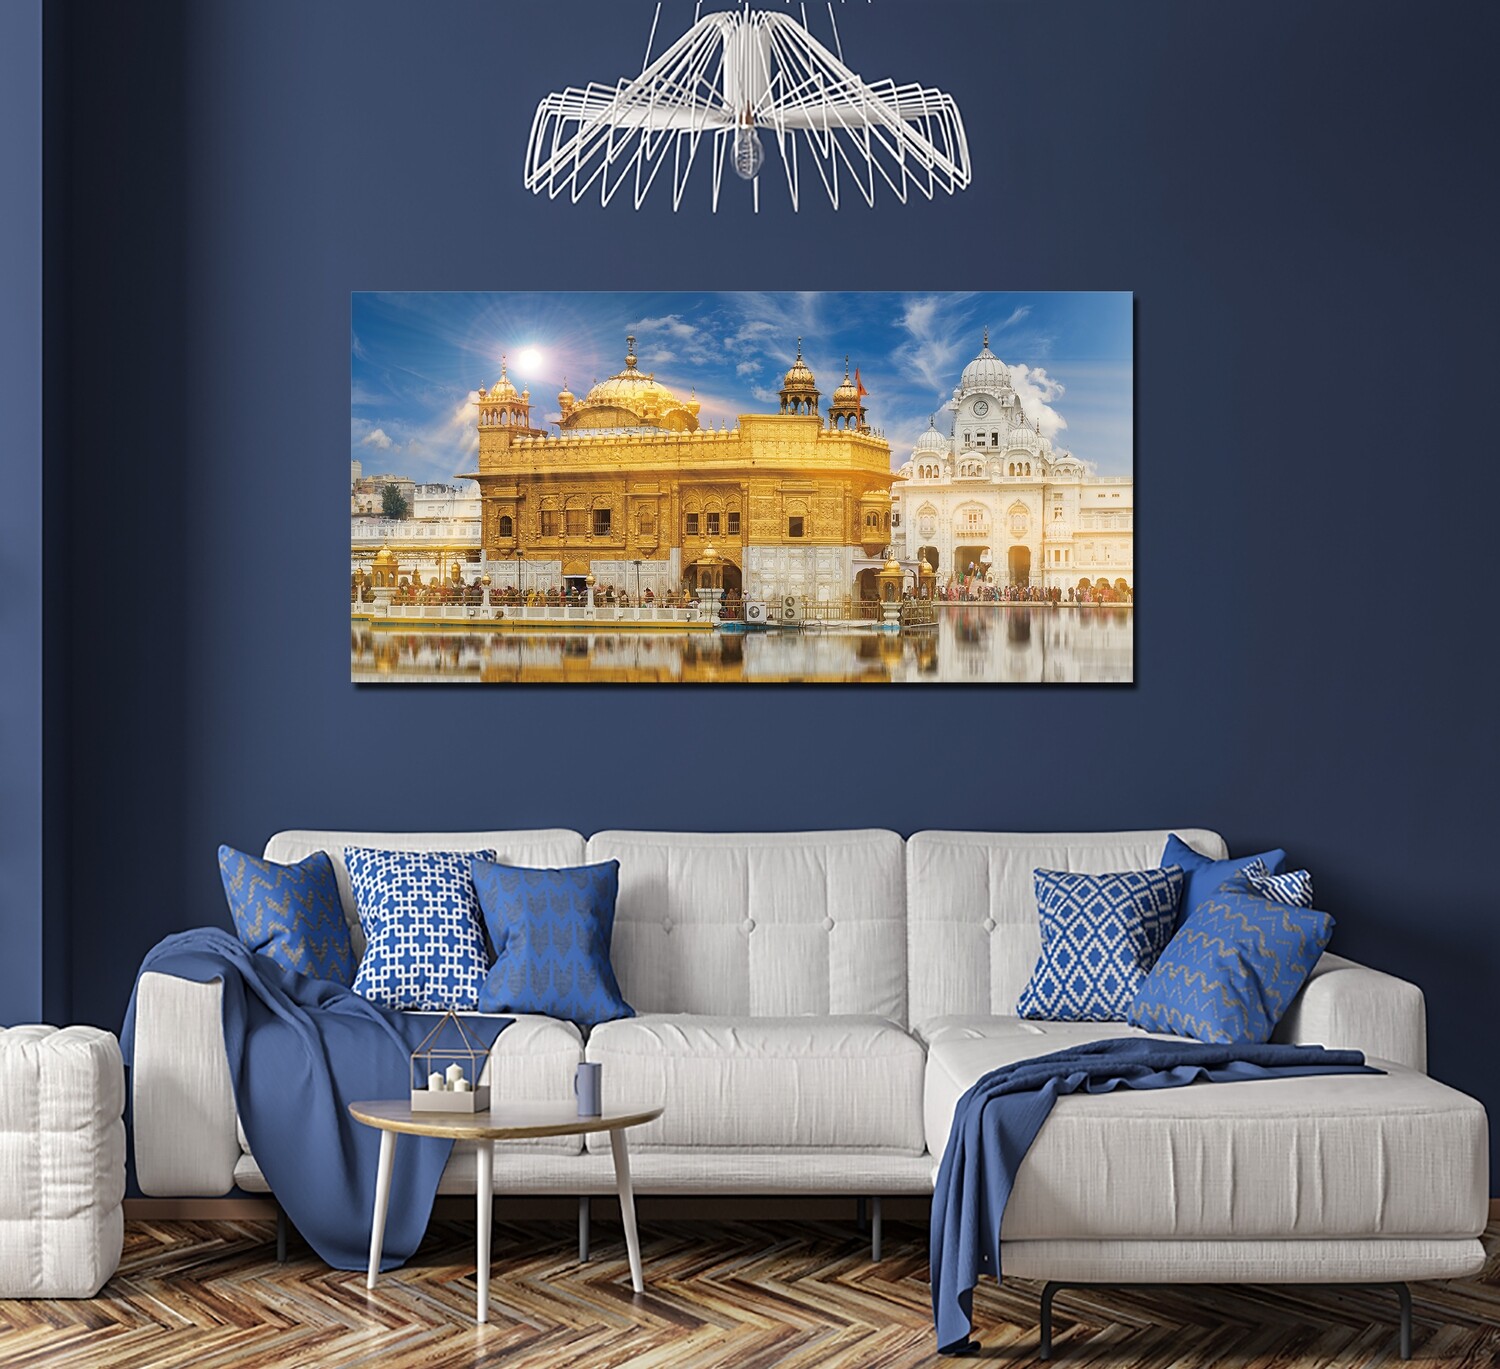 Golden Temple - Modern Luxury Wall art Printed on Acrylic Glass - Frameless and Ready to Hang